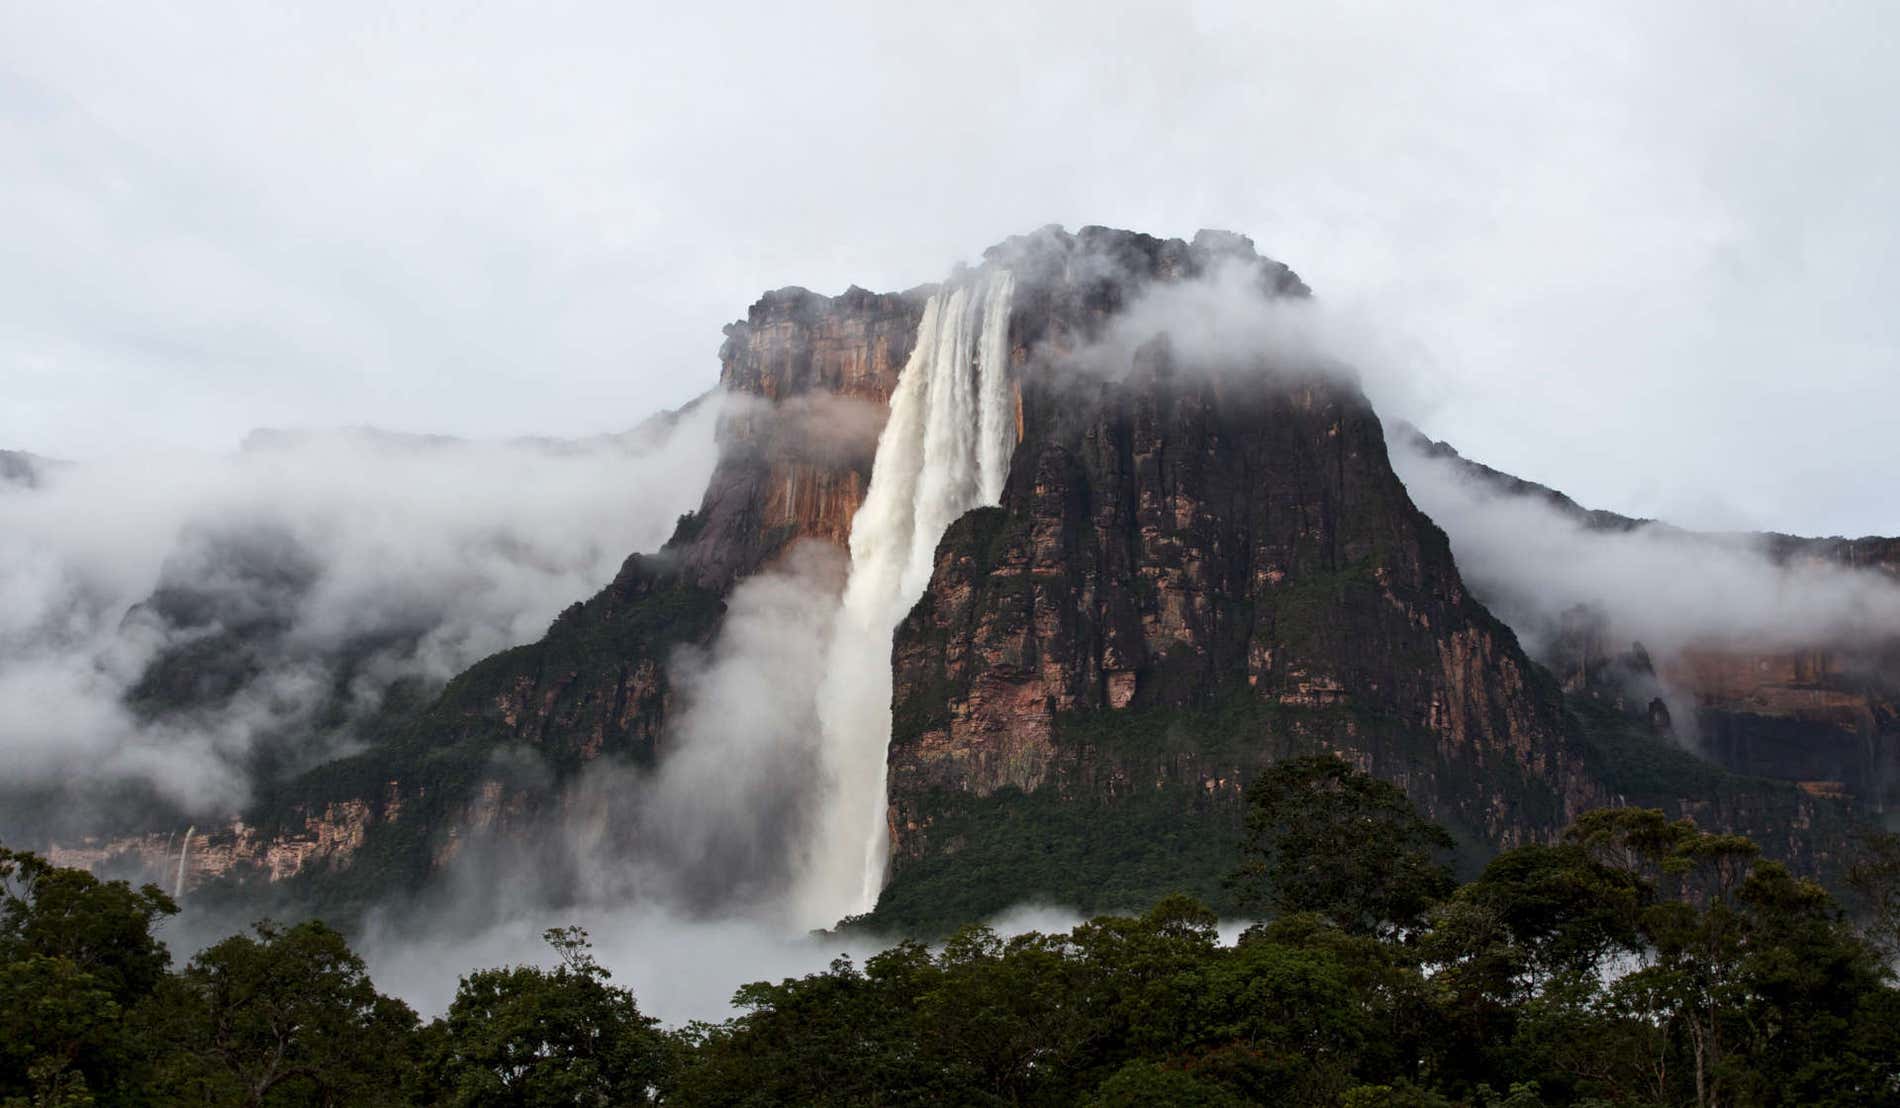 10 of the World’s Tallest Waterfalls